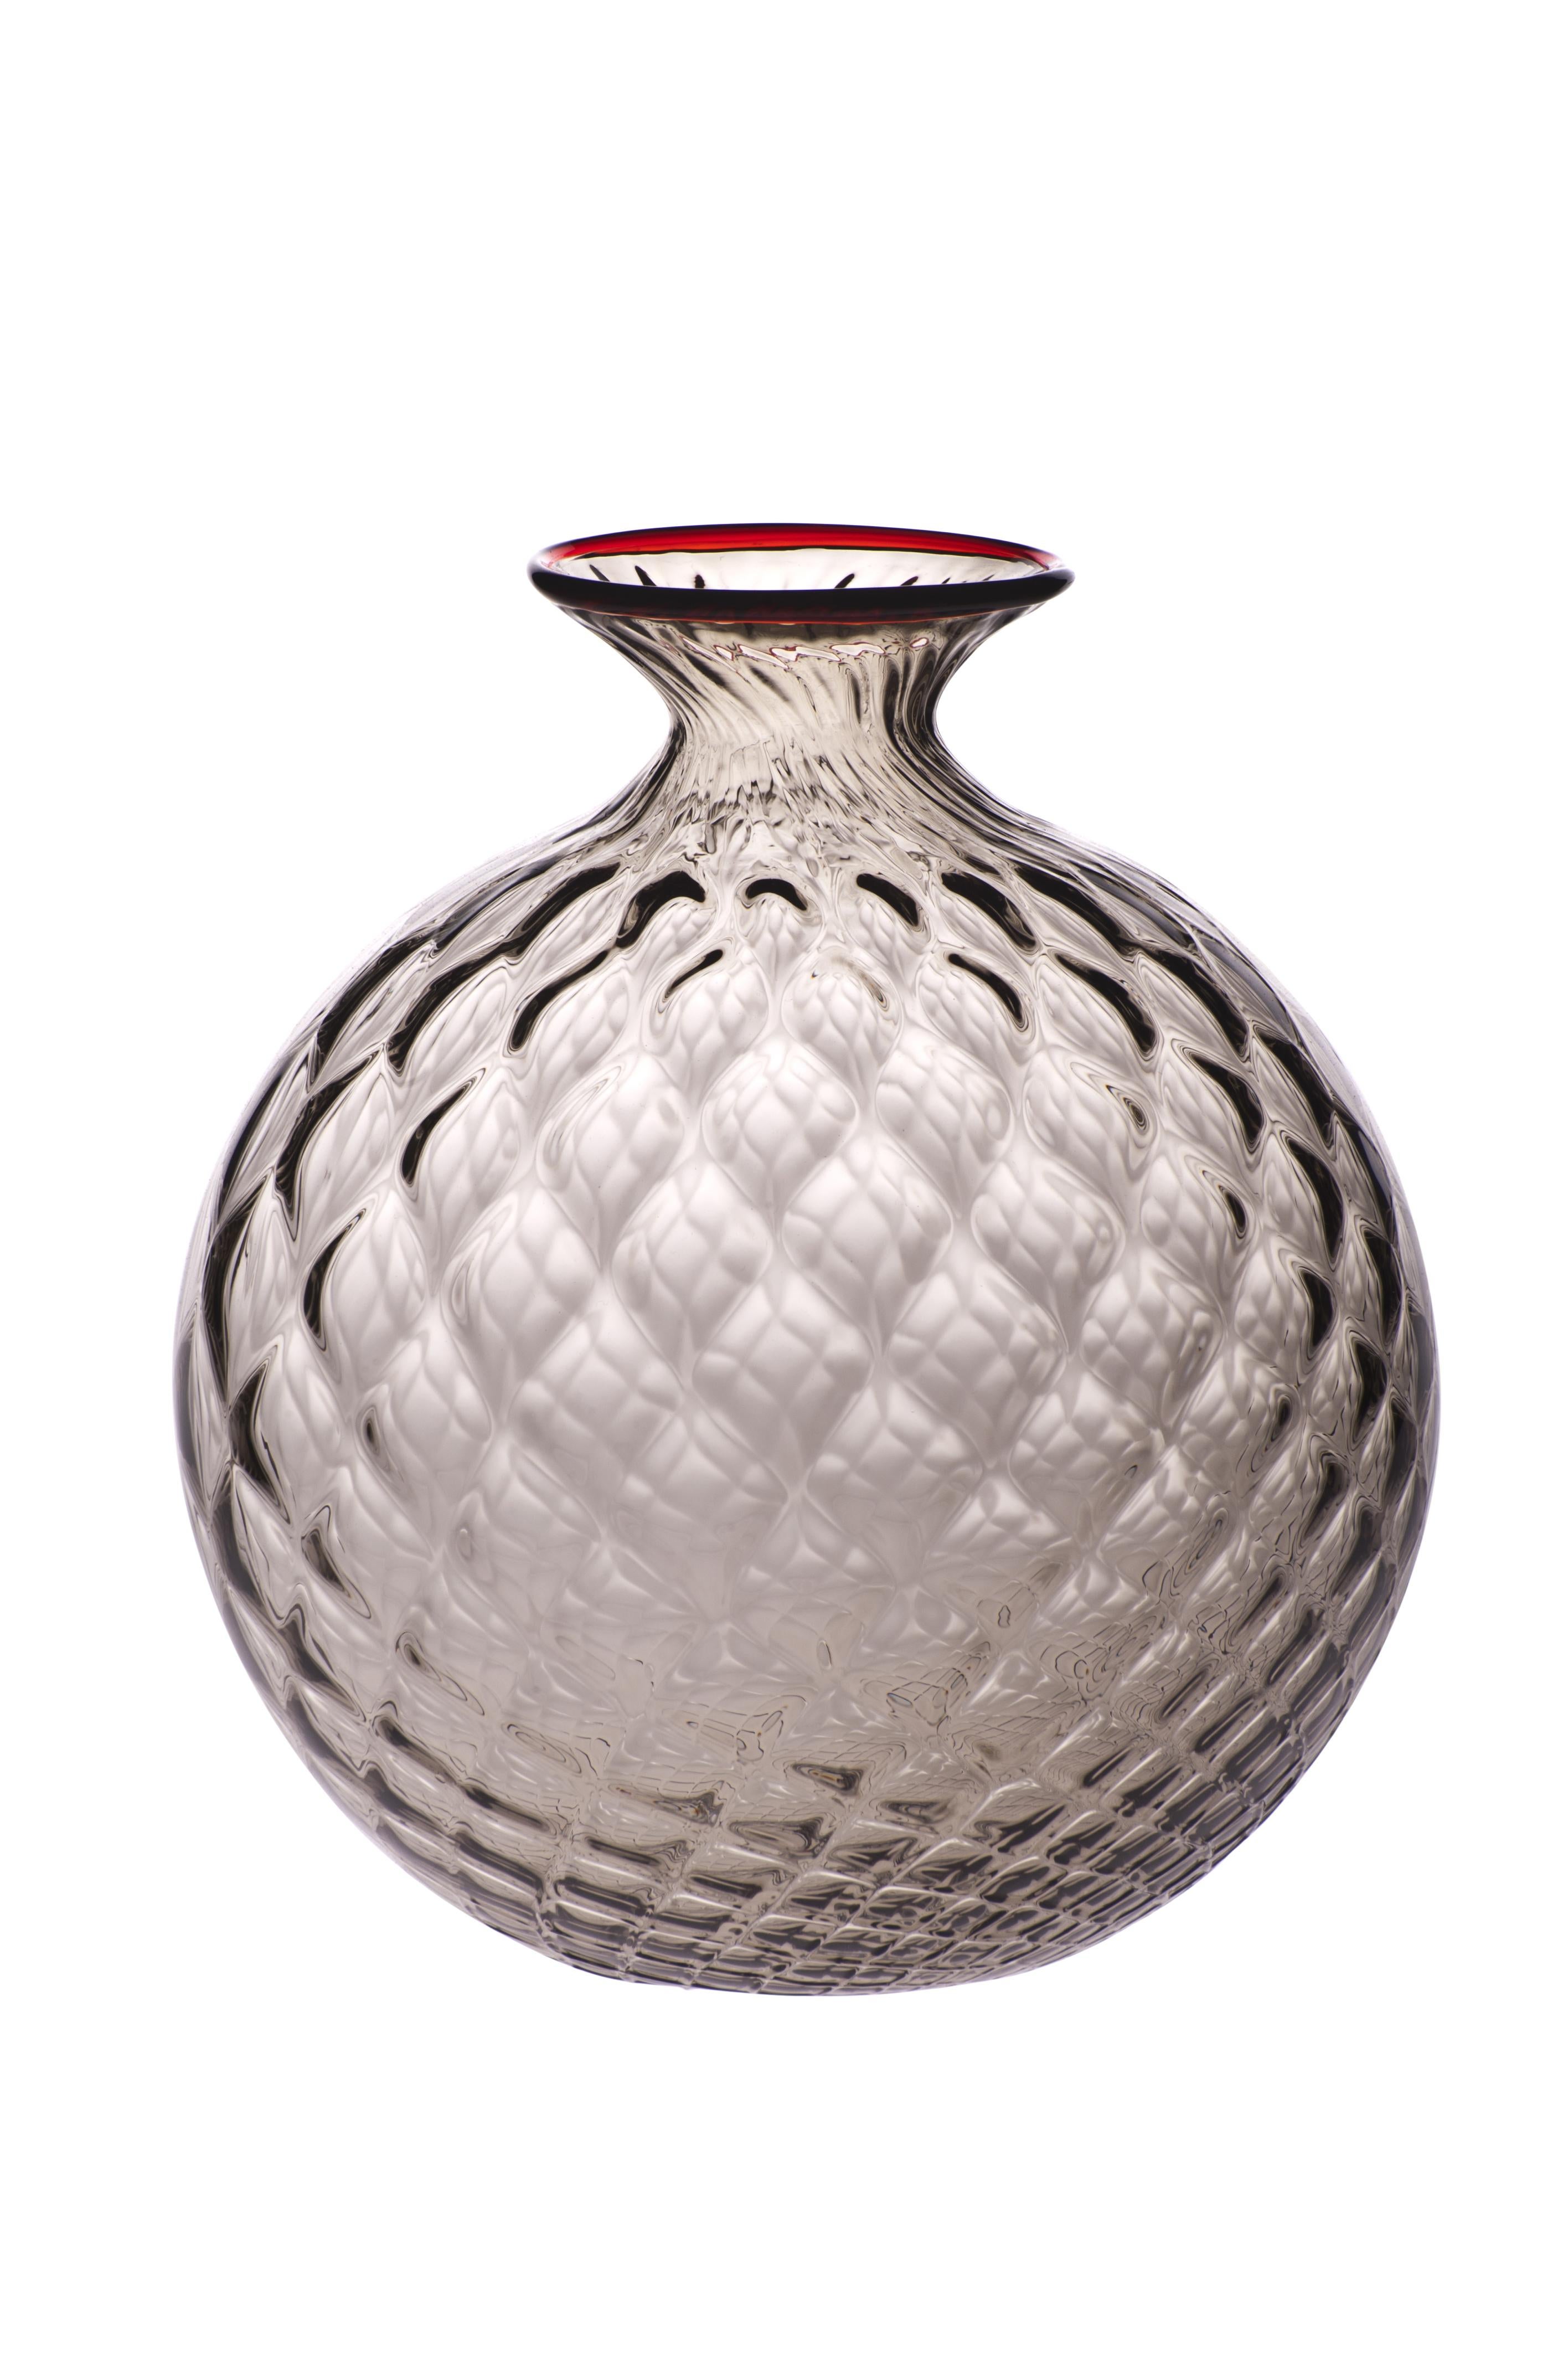 Venini glass vase with full body and textured surface with hexagonal shaped pattern in grape designed in 1970. Perfect for indoor home decor as container or strong statement piece for any room. Also available in other colors on 1stdibs. Limited